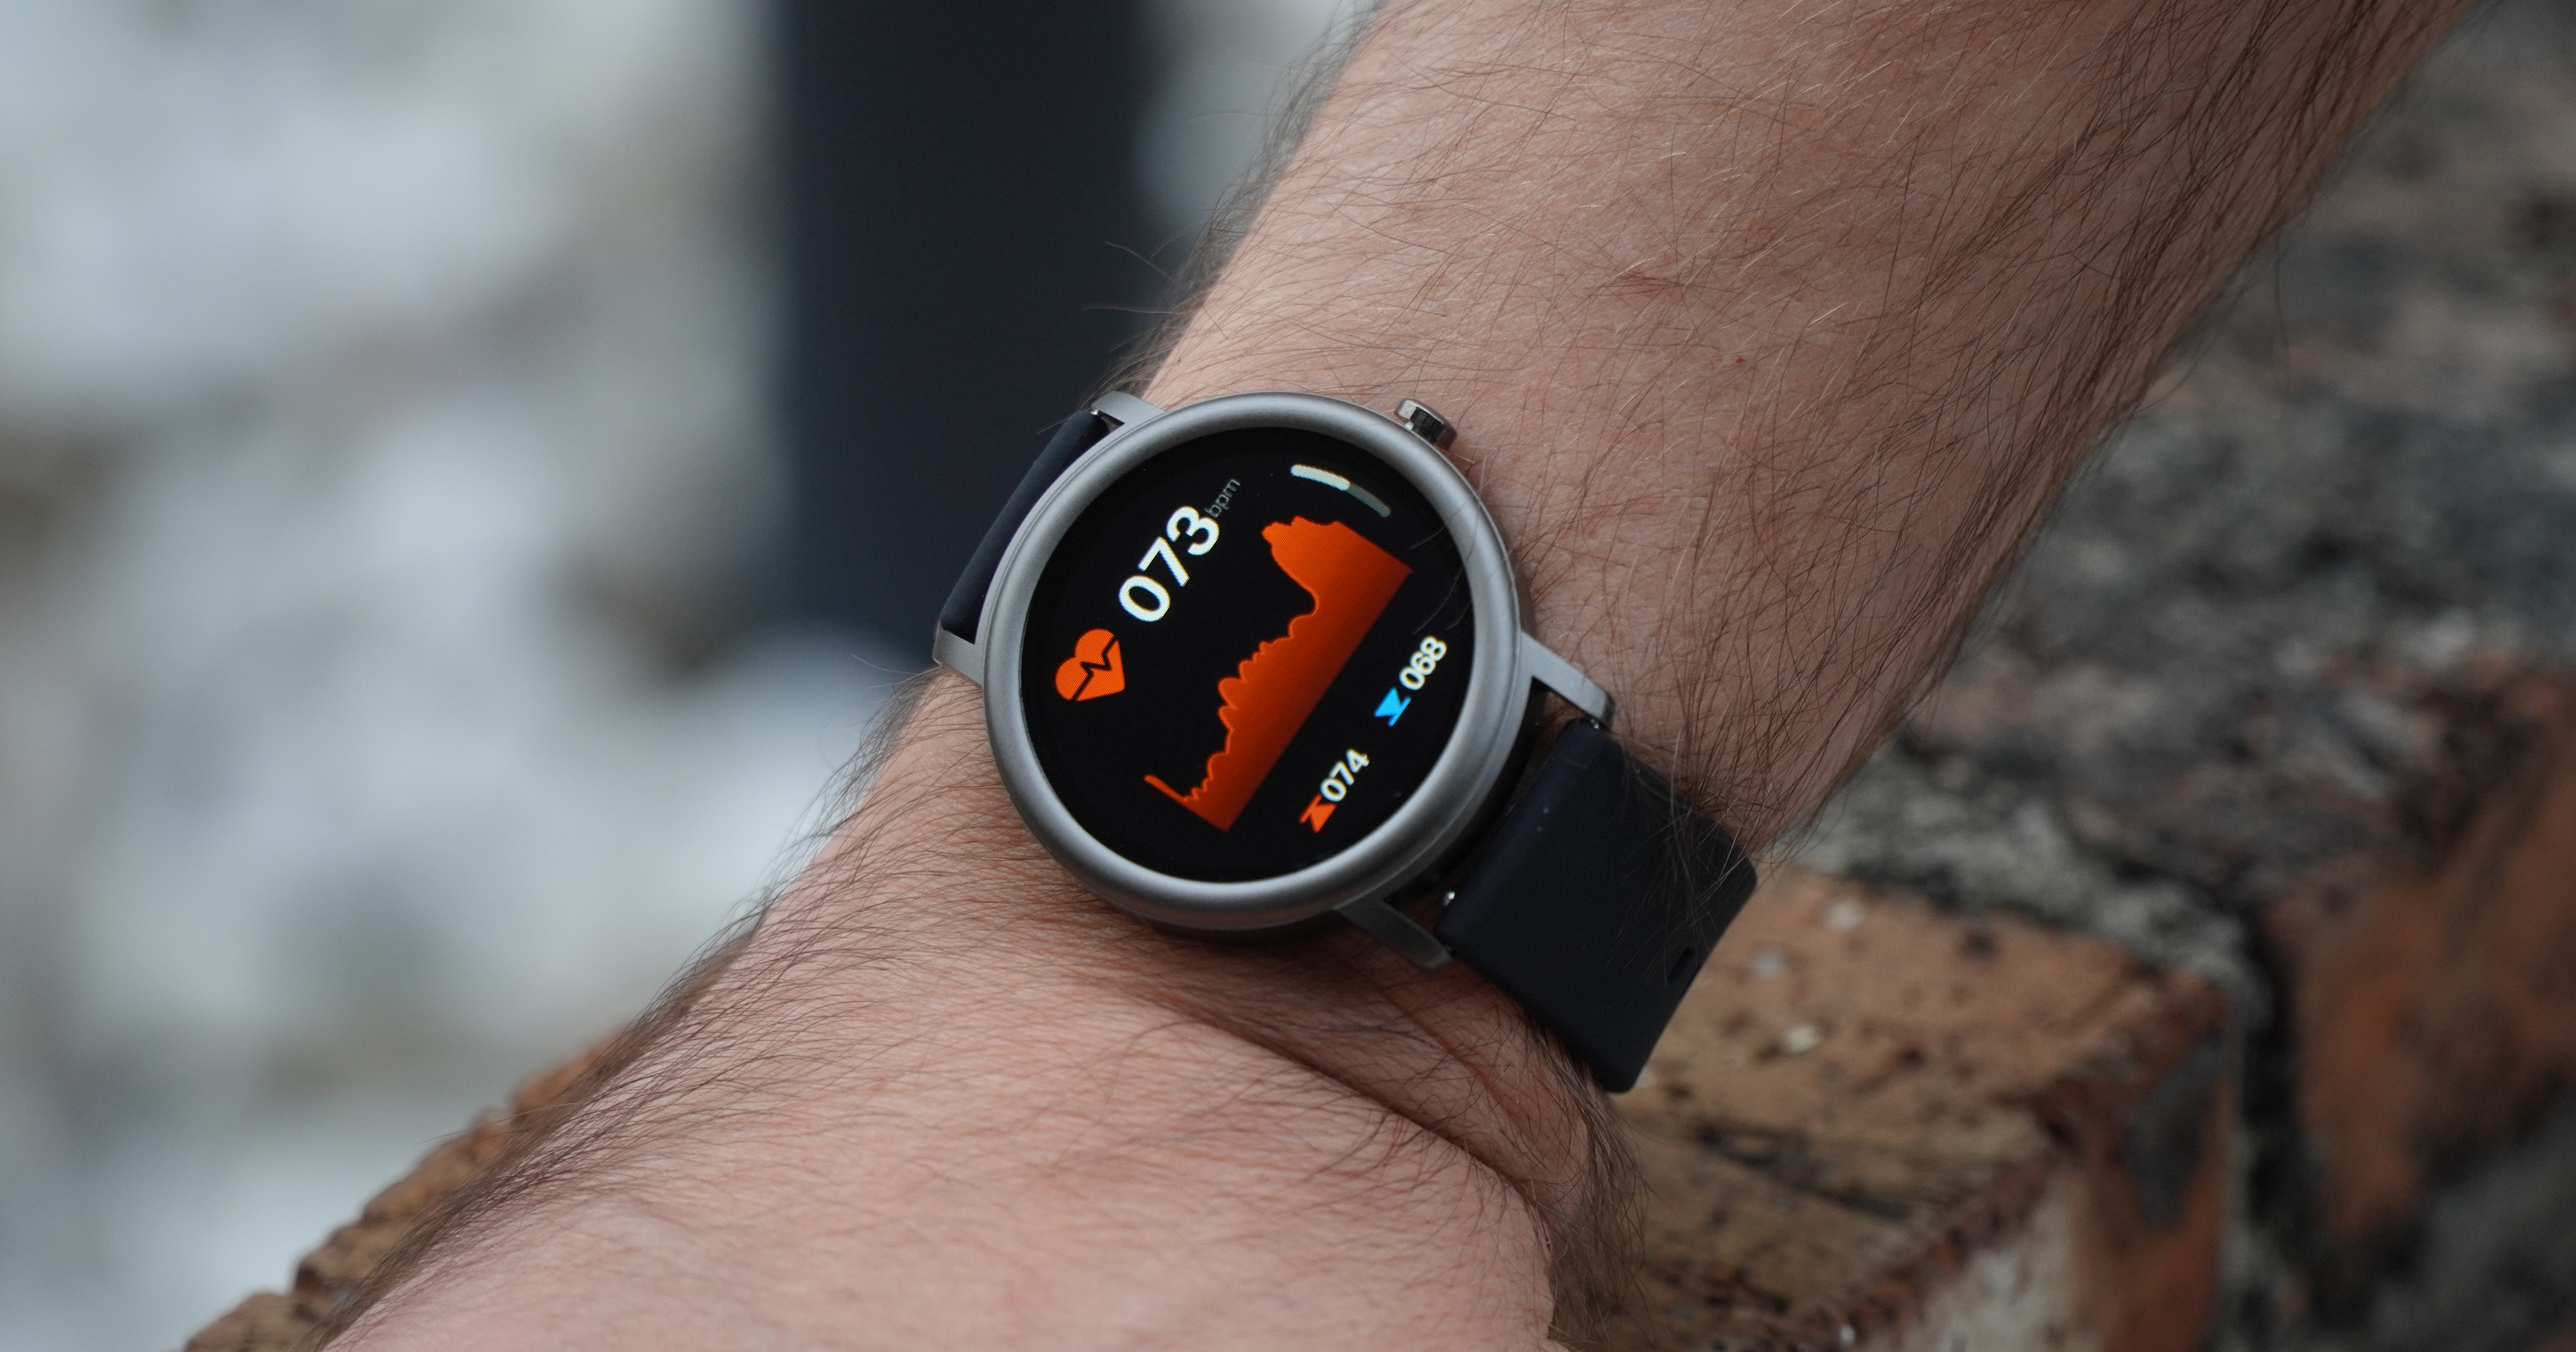 Here is the brand new Xiaomi Mibro Air Connected Watch with a discount for its release â The Courier